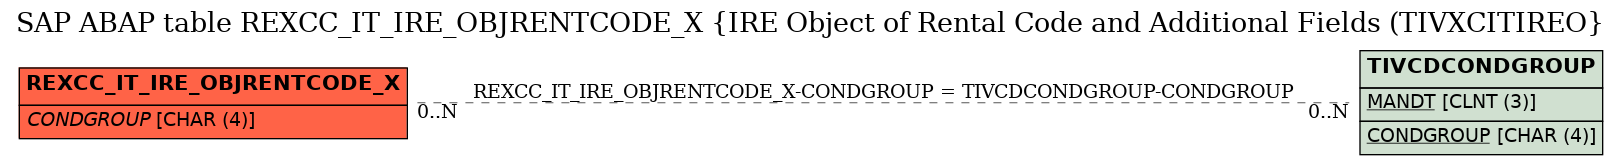 E-R Diagram for table REXCC_IT_IRE_OBJRENTCODE_X (IRE Object of Rental Code and Additional Fields (TIVXCITIREO)